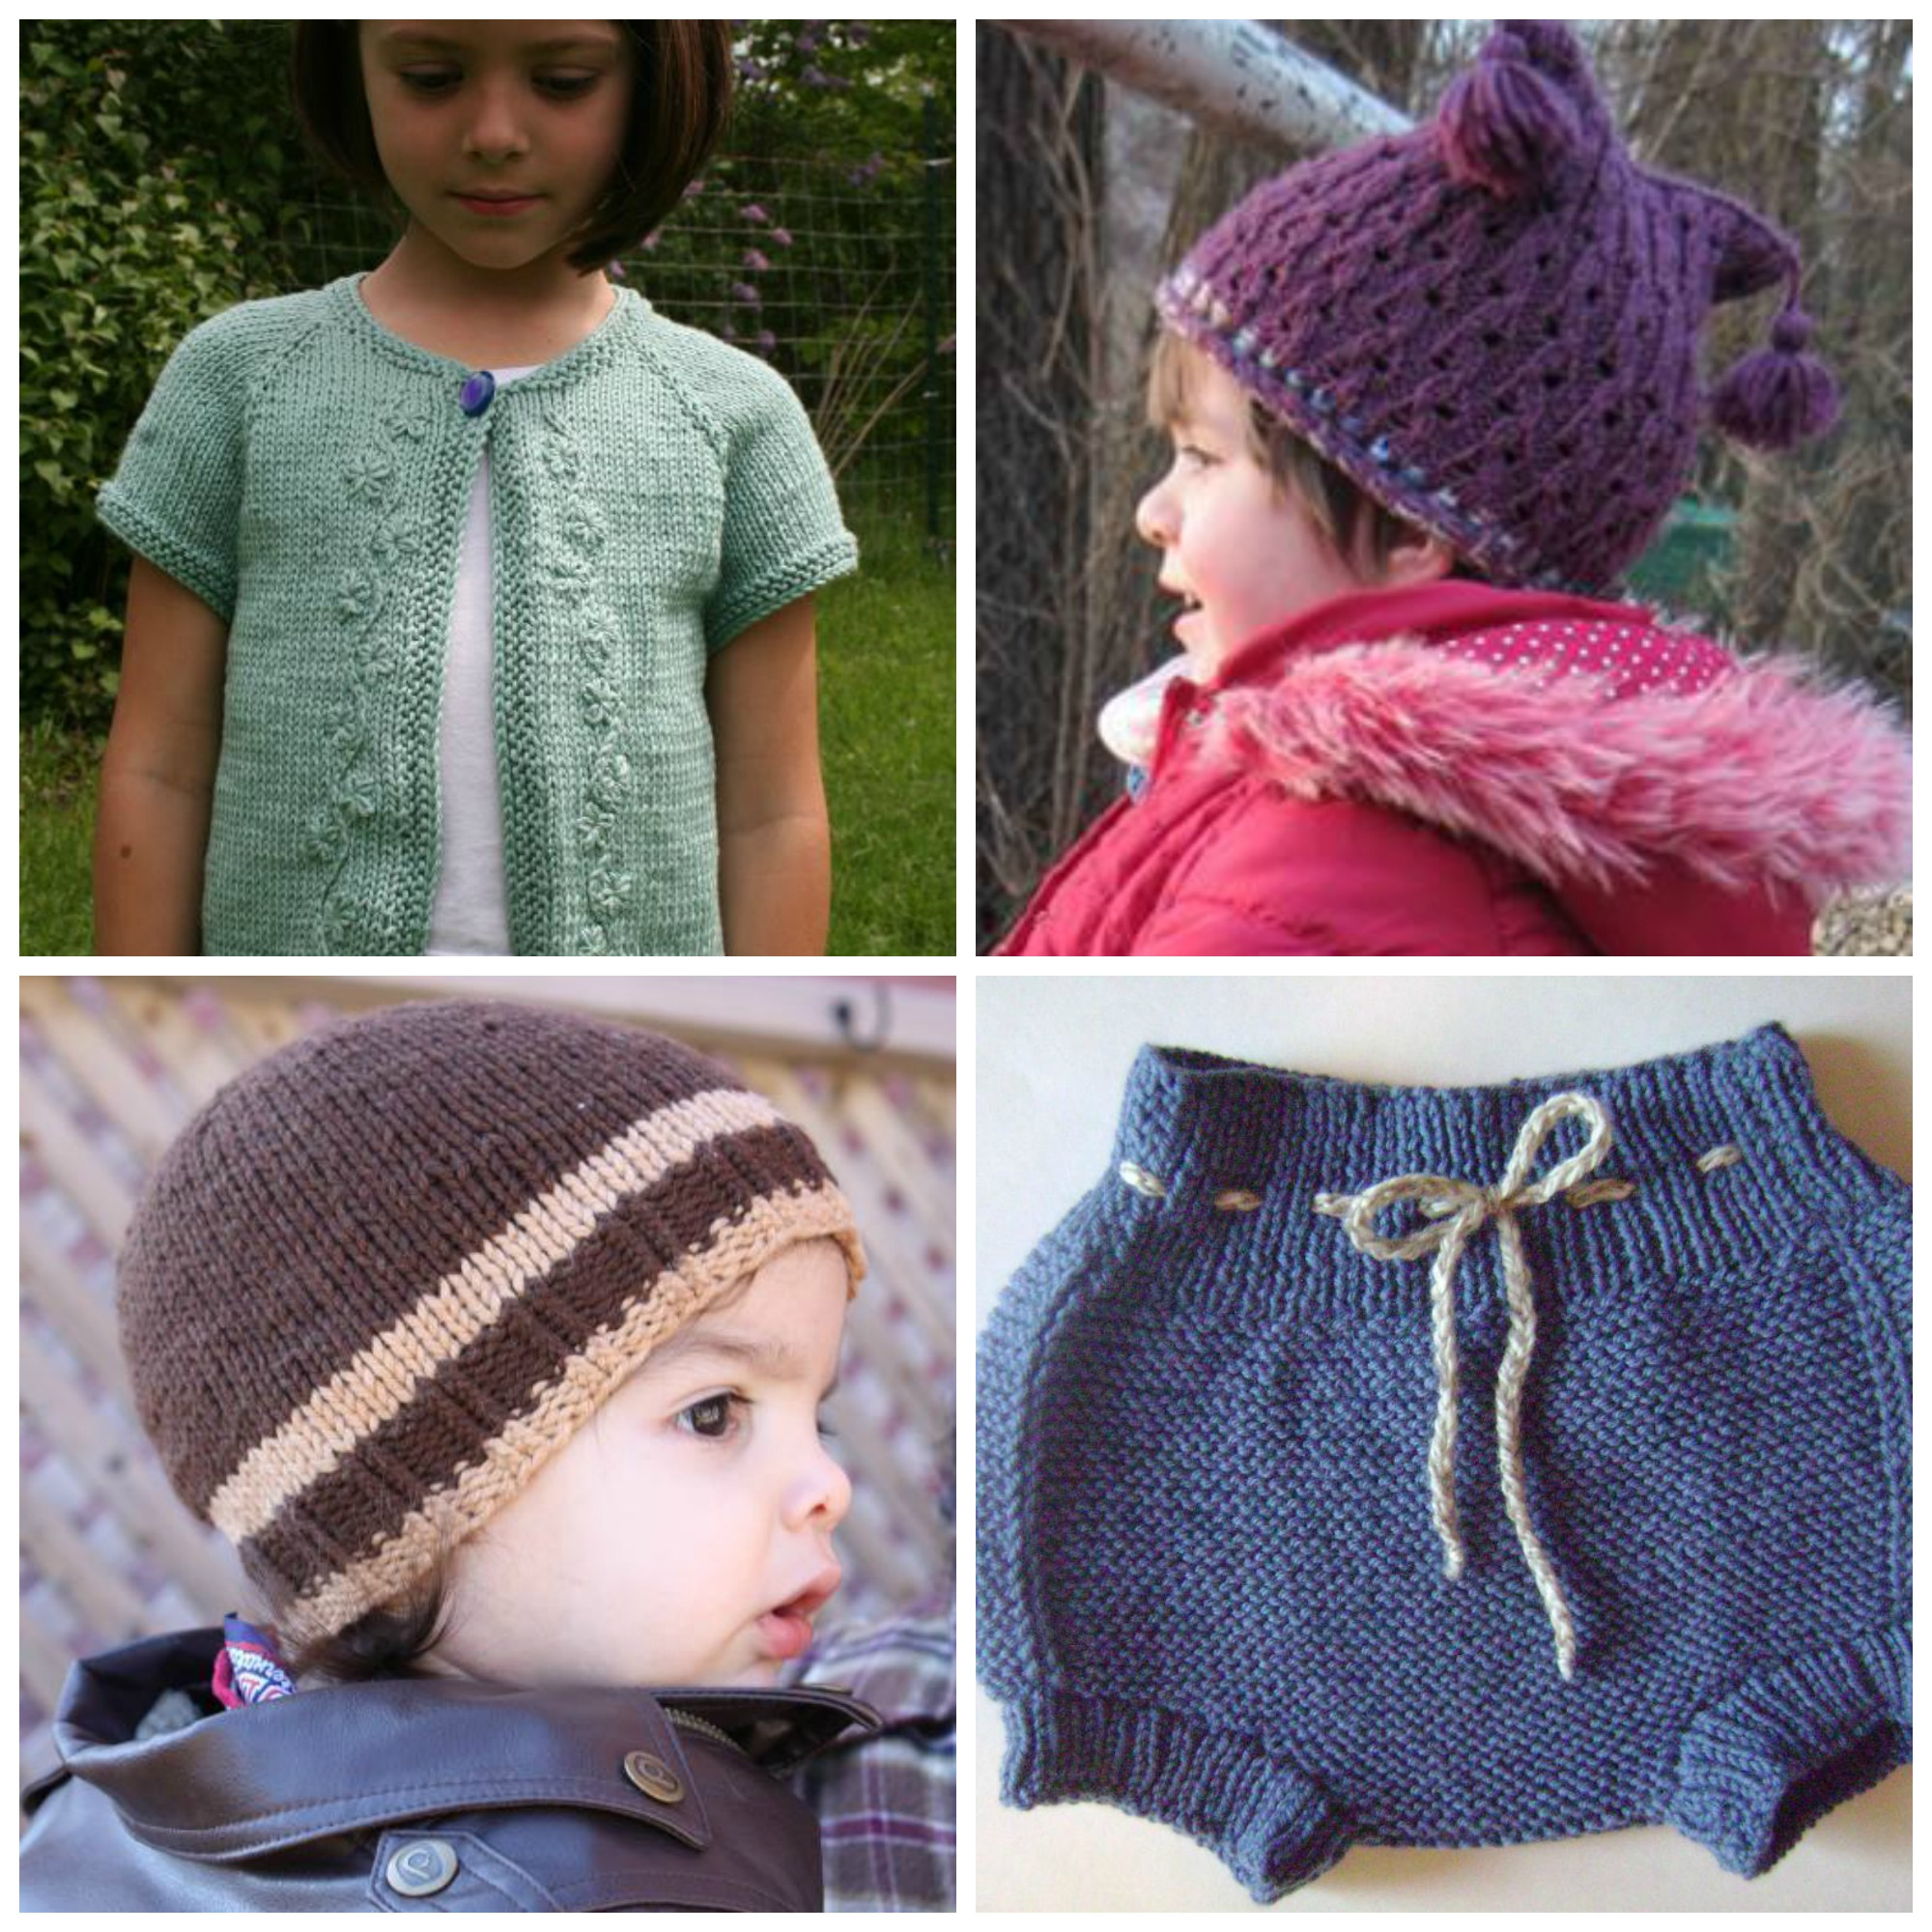 Free Knitting Patterns Download 5 Free Knitting Pattern Books With Over 25 Free Patterns